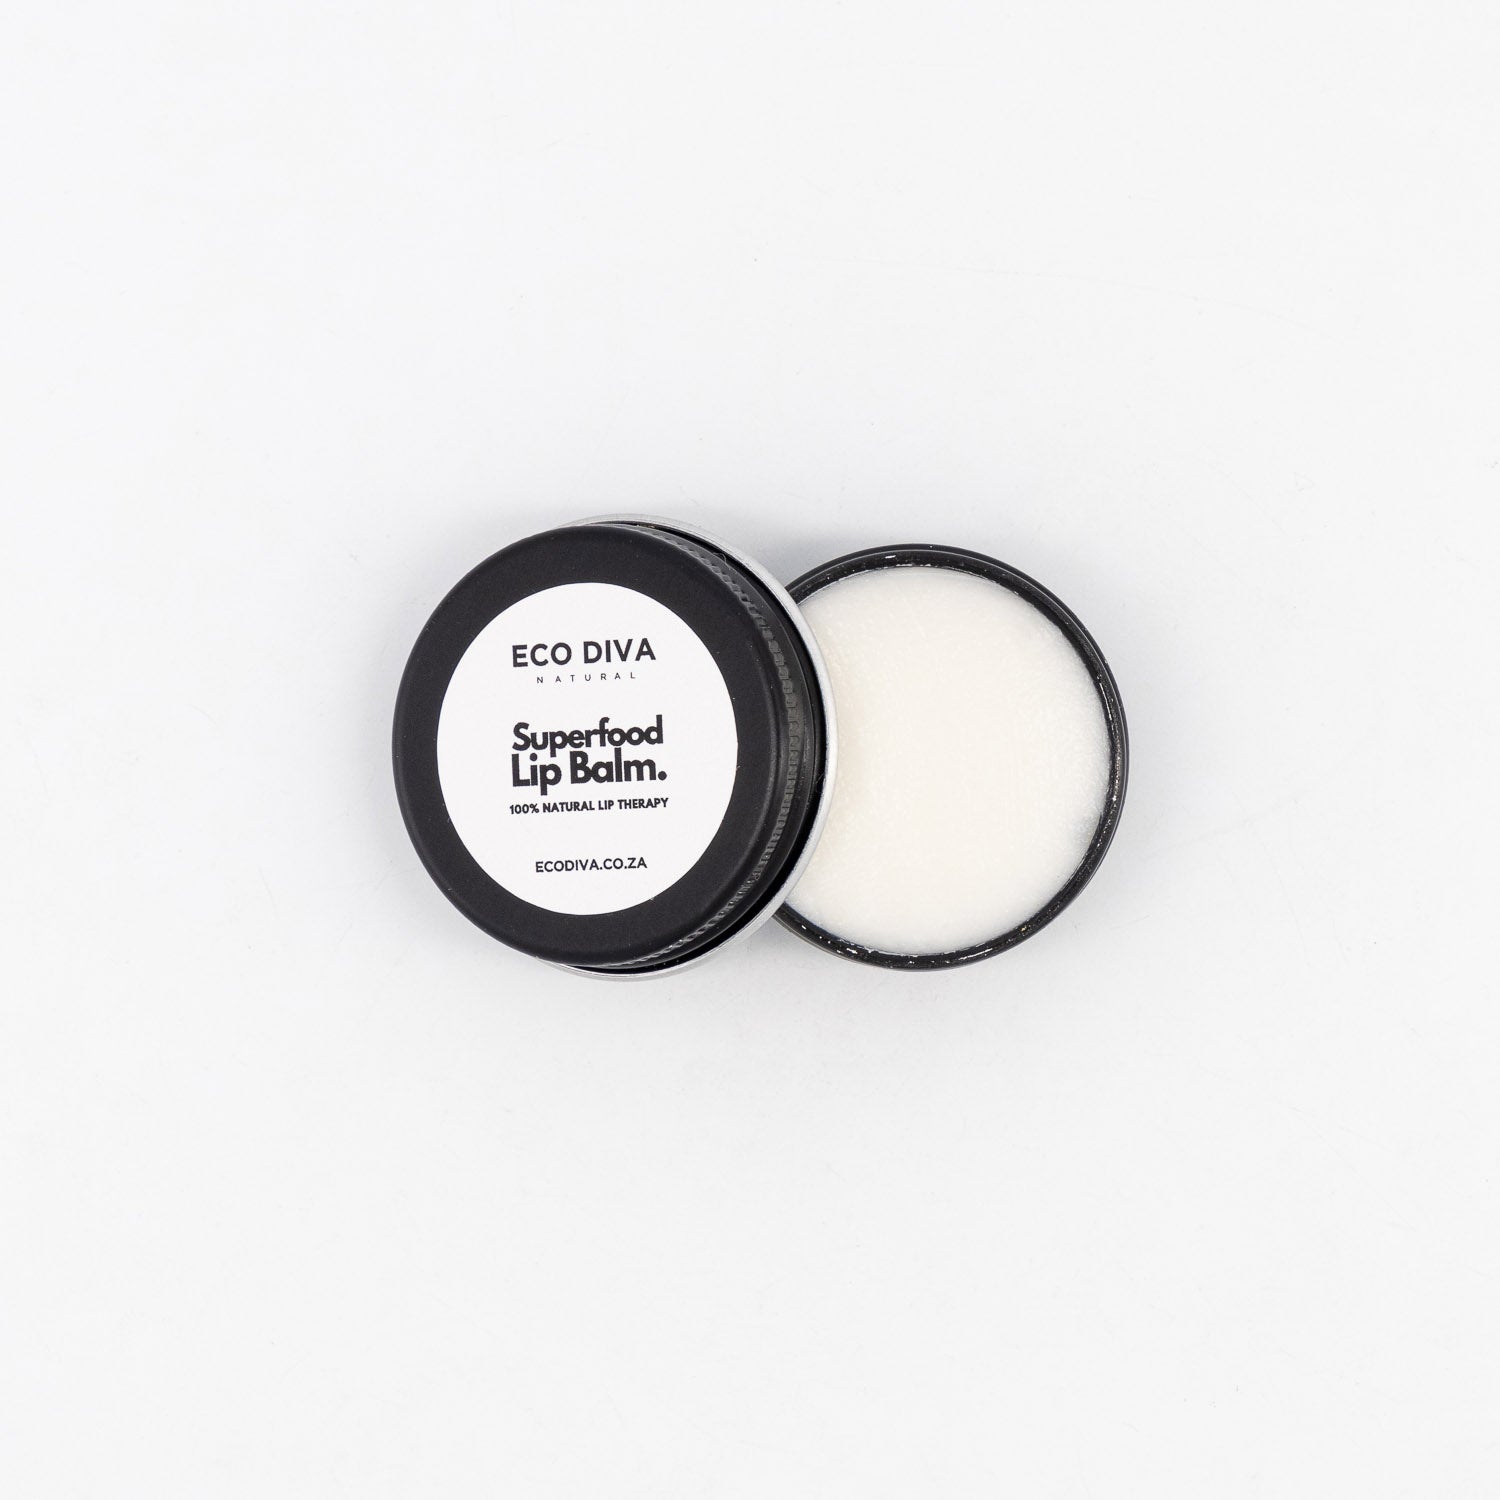 Hydrating Lip Balm - Soothes Chapped Lips, Hydrates with Vitamins C,A,E/Shea Butter